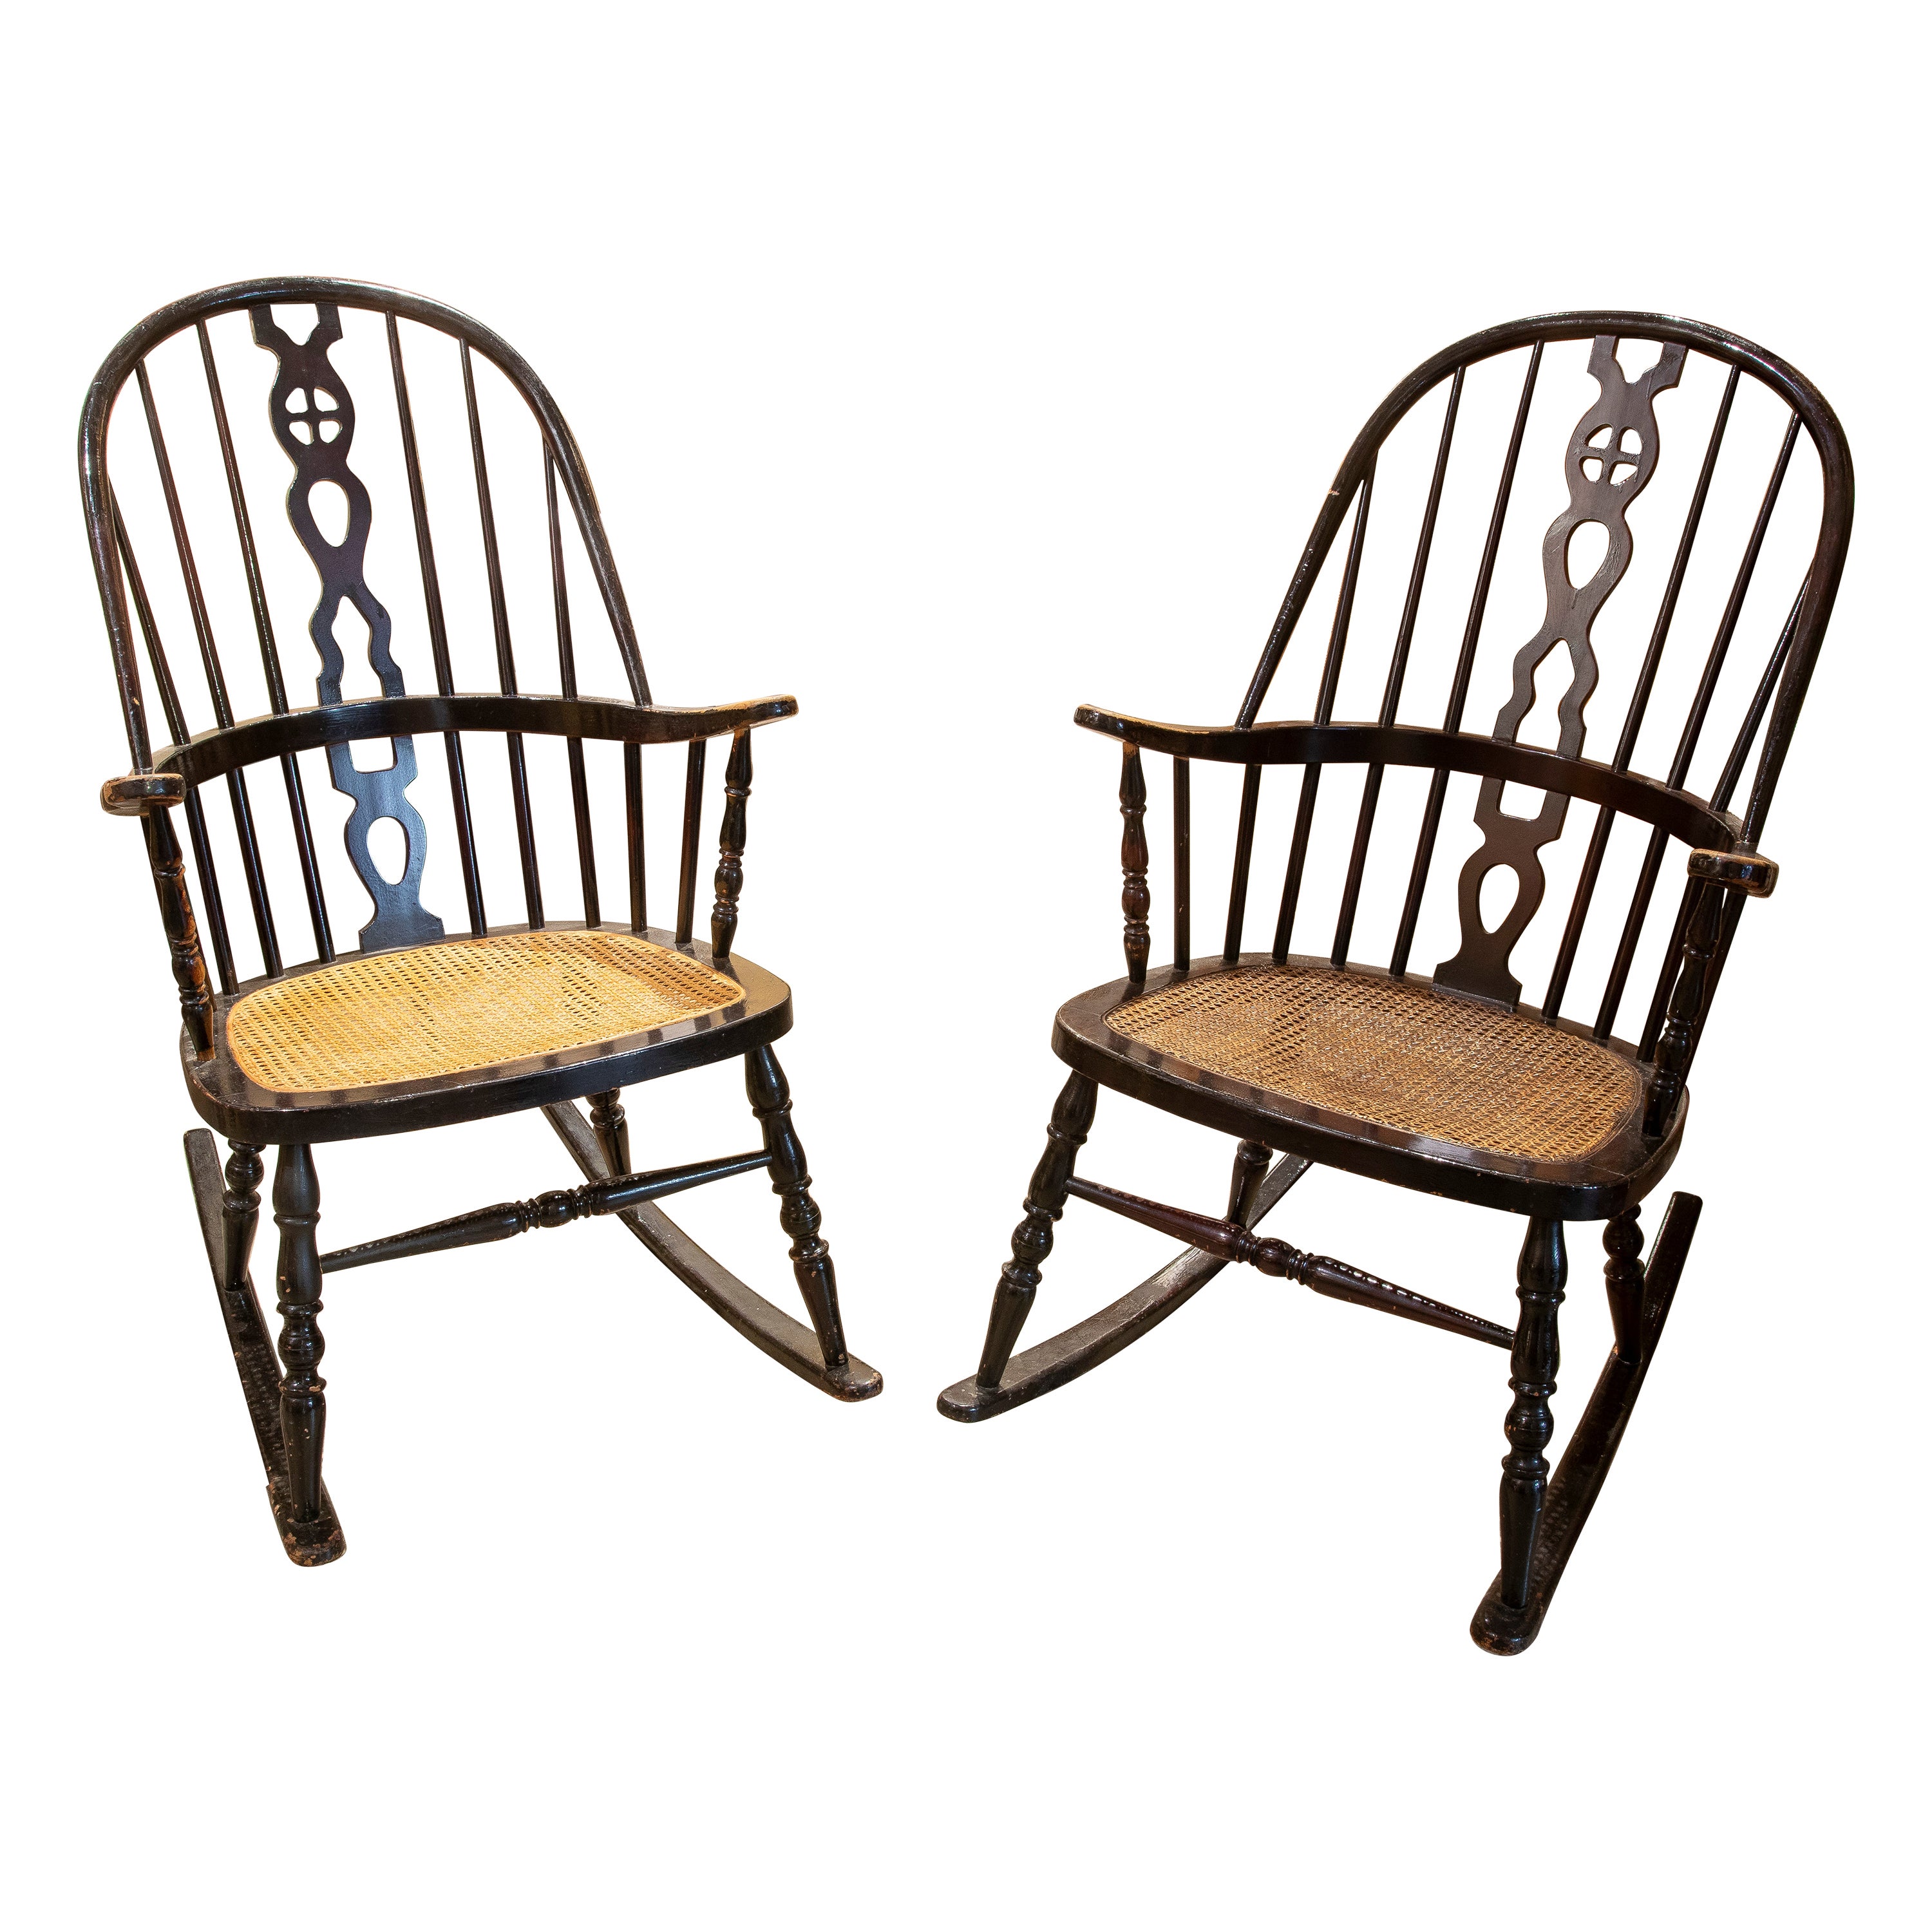 Pair of Wooden Rocking Chairs with Raffia Seat